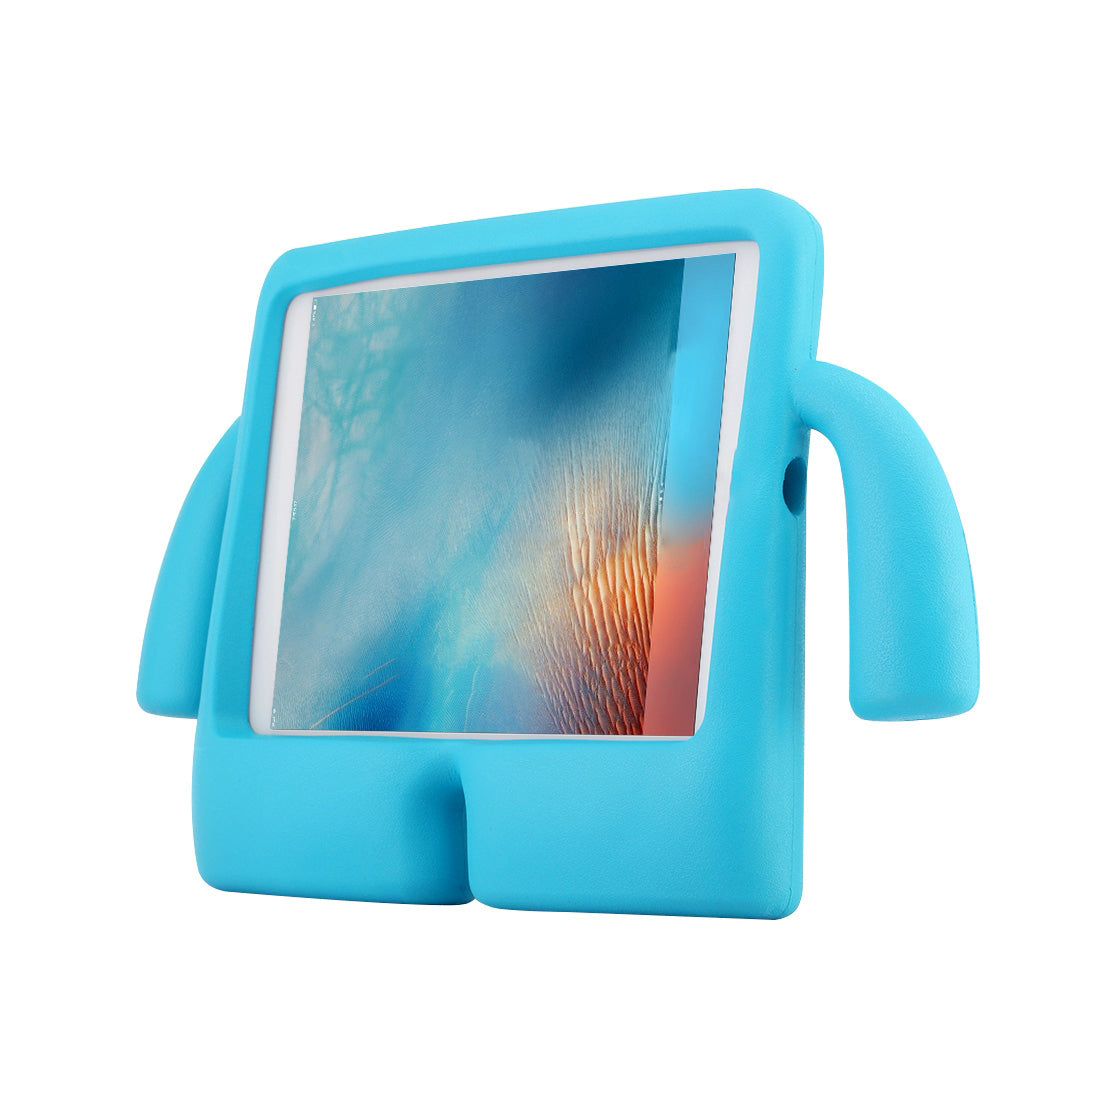 For Apple iPad Pro 11 2018 Kids Case Shockproof Cover With Carry Handle - Blue